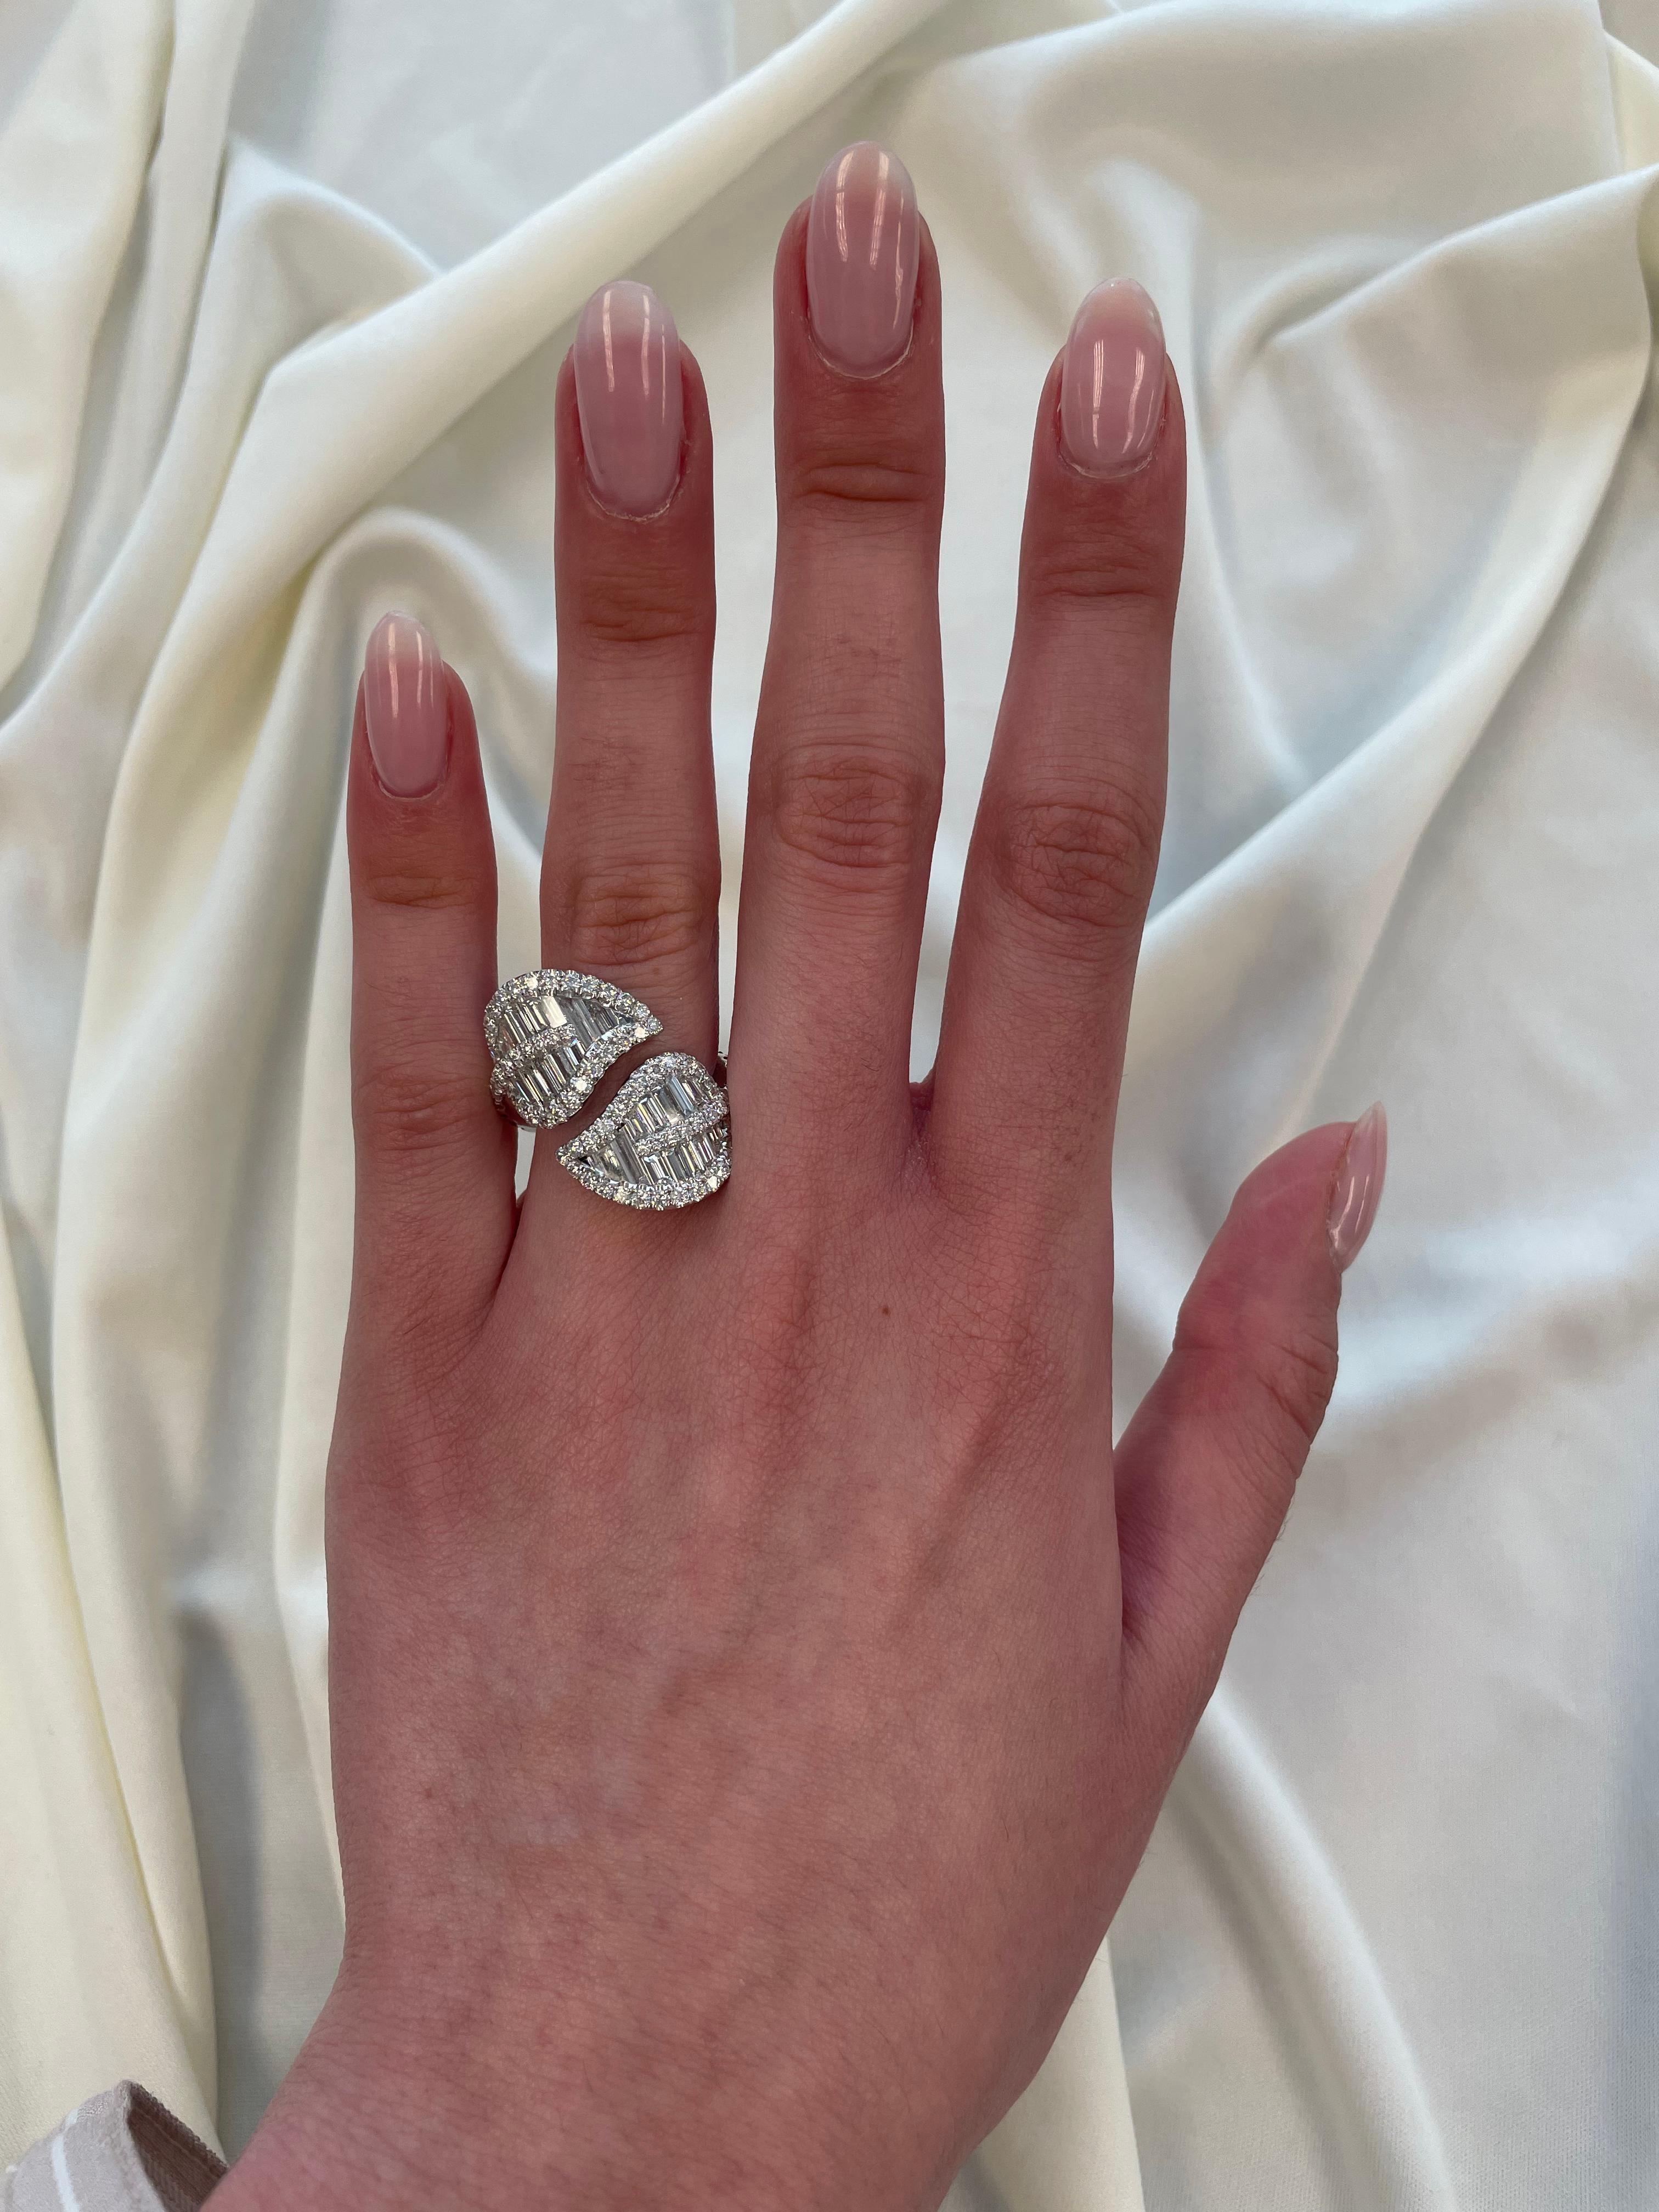 Stunning modern leaf motif bypass ring, by Alexander Beverly Hills.
100 round and baguette cut diamonds, 3.23 carats. Approximately G/H color grade and VS clarity grade. 18-karat white gold, 10.17 grams, current ring size 7.
Accommodated with an